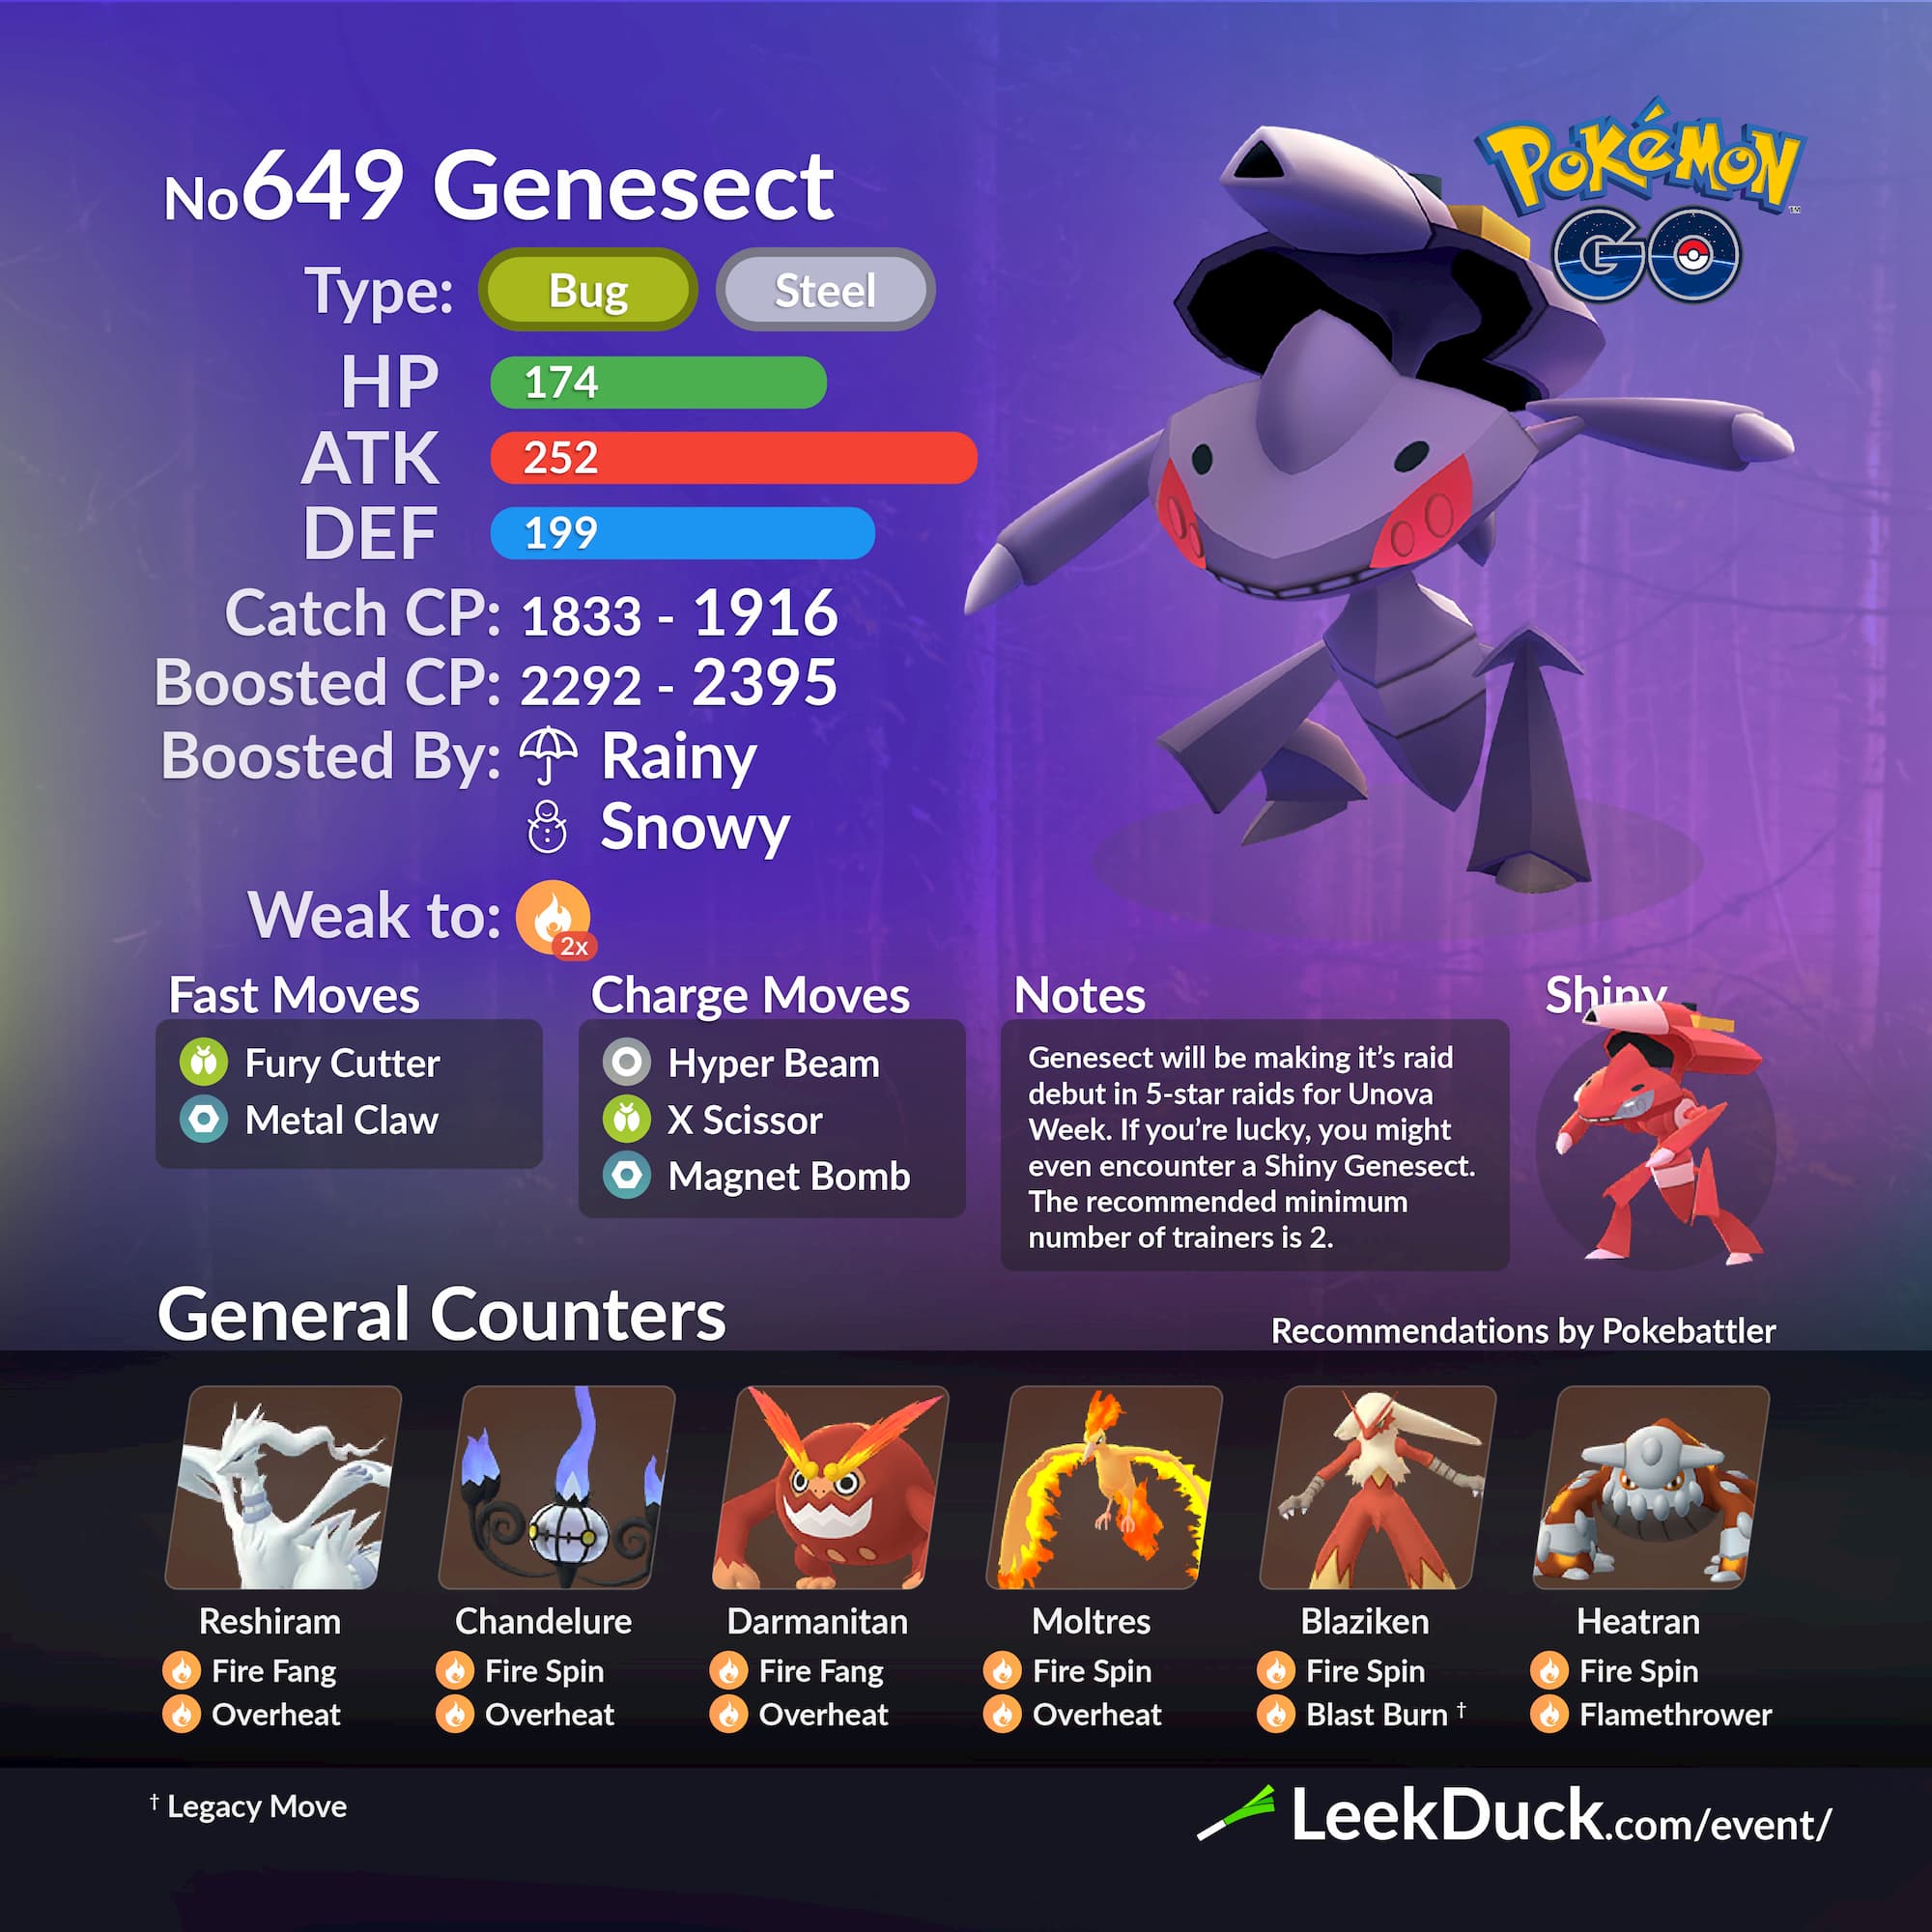 Genesect counter guide!! : r/pokemongo